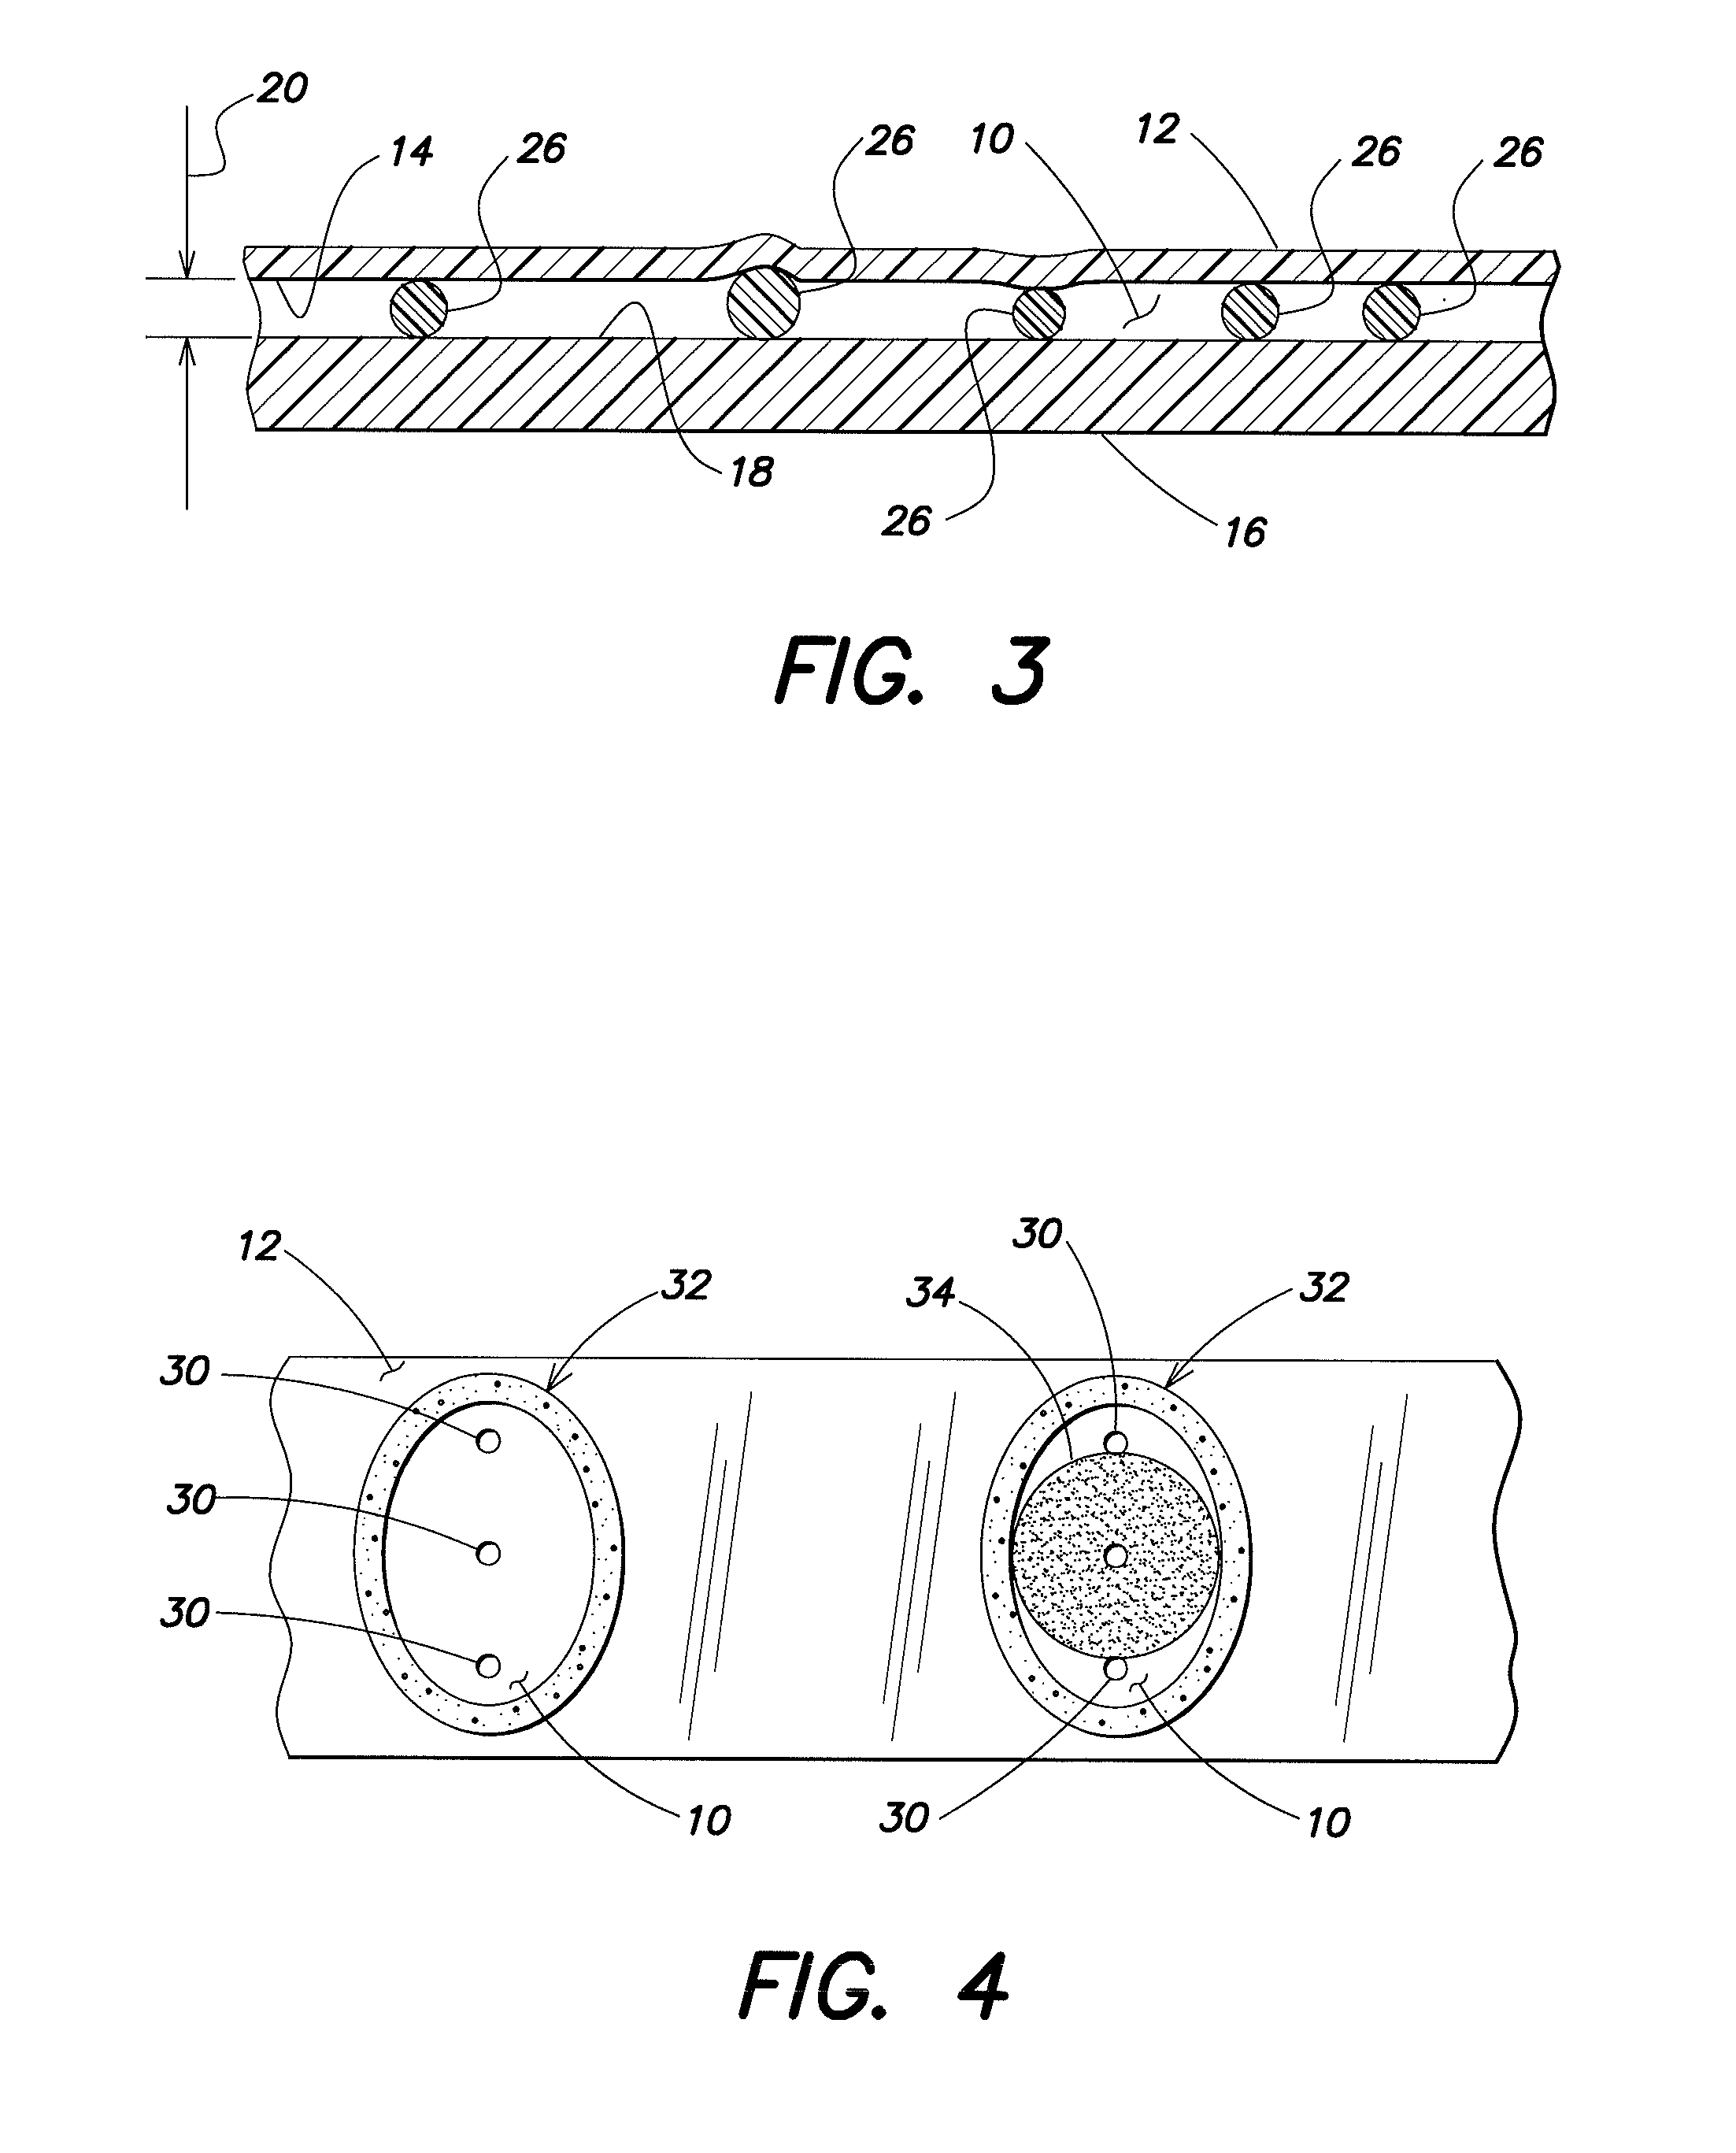 Method for measuring the area of a sample disposed within an analysis chamber